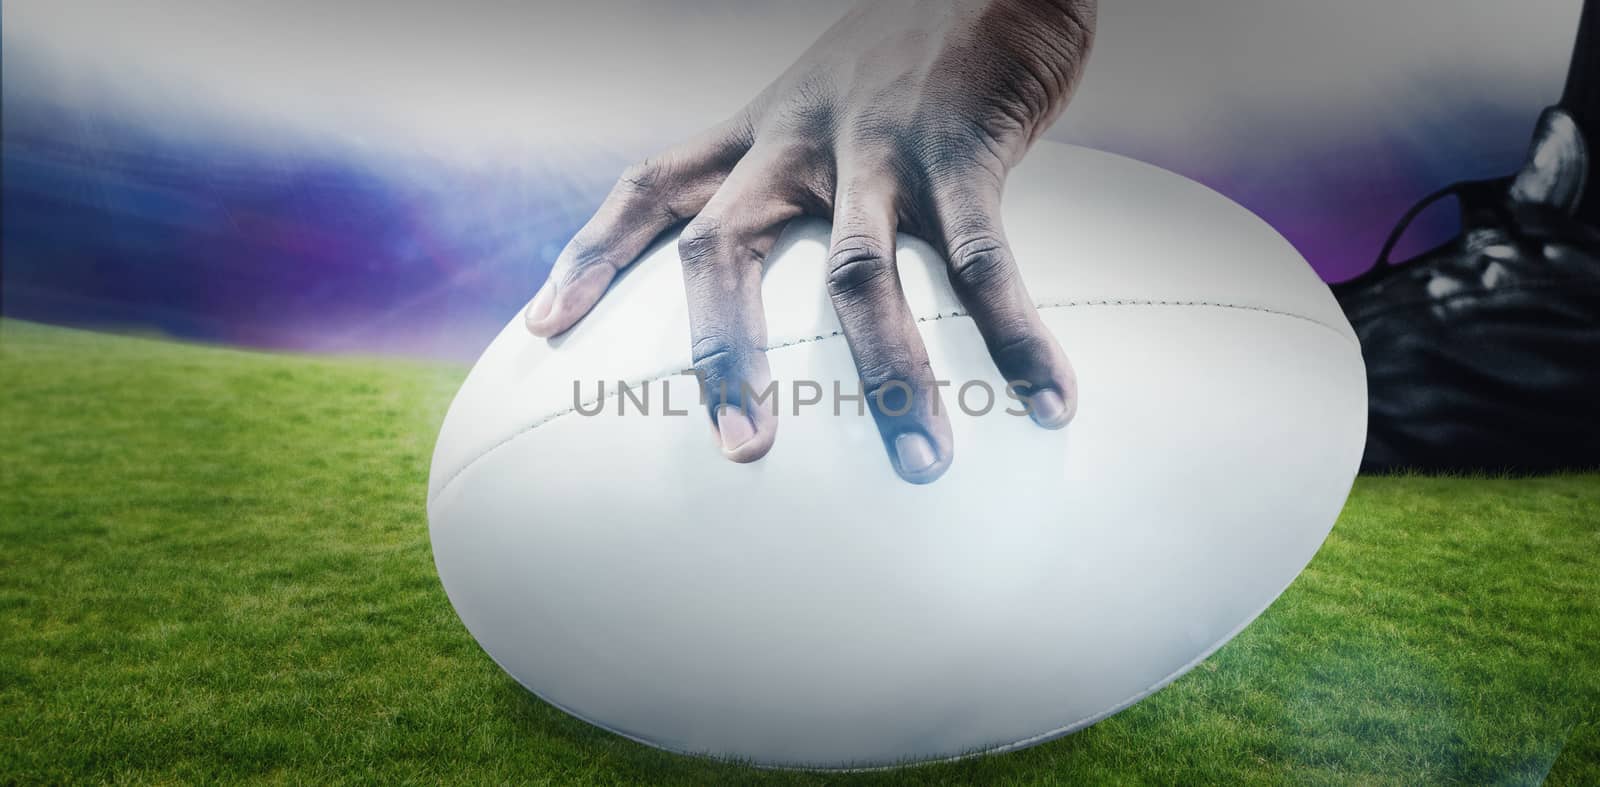 Cropped image of sportsman holding rugby ball against rugby stadium